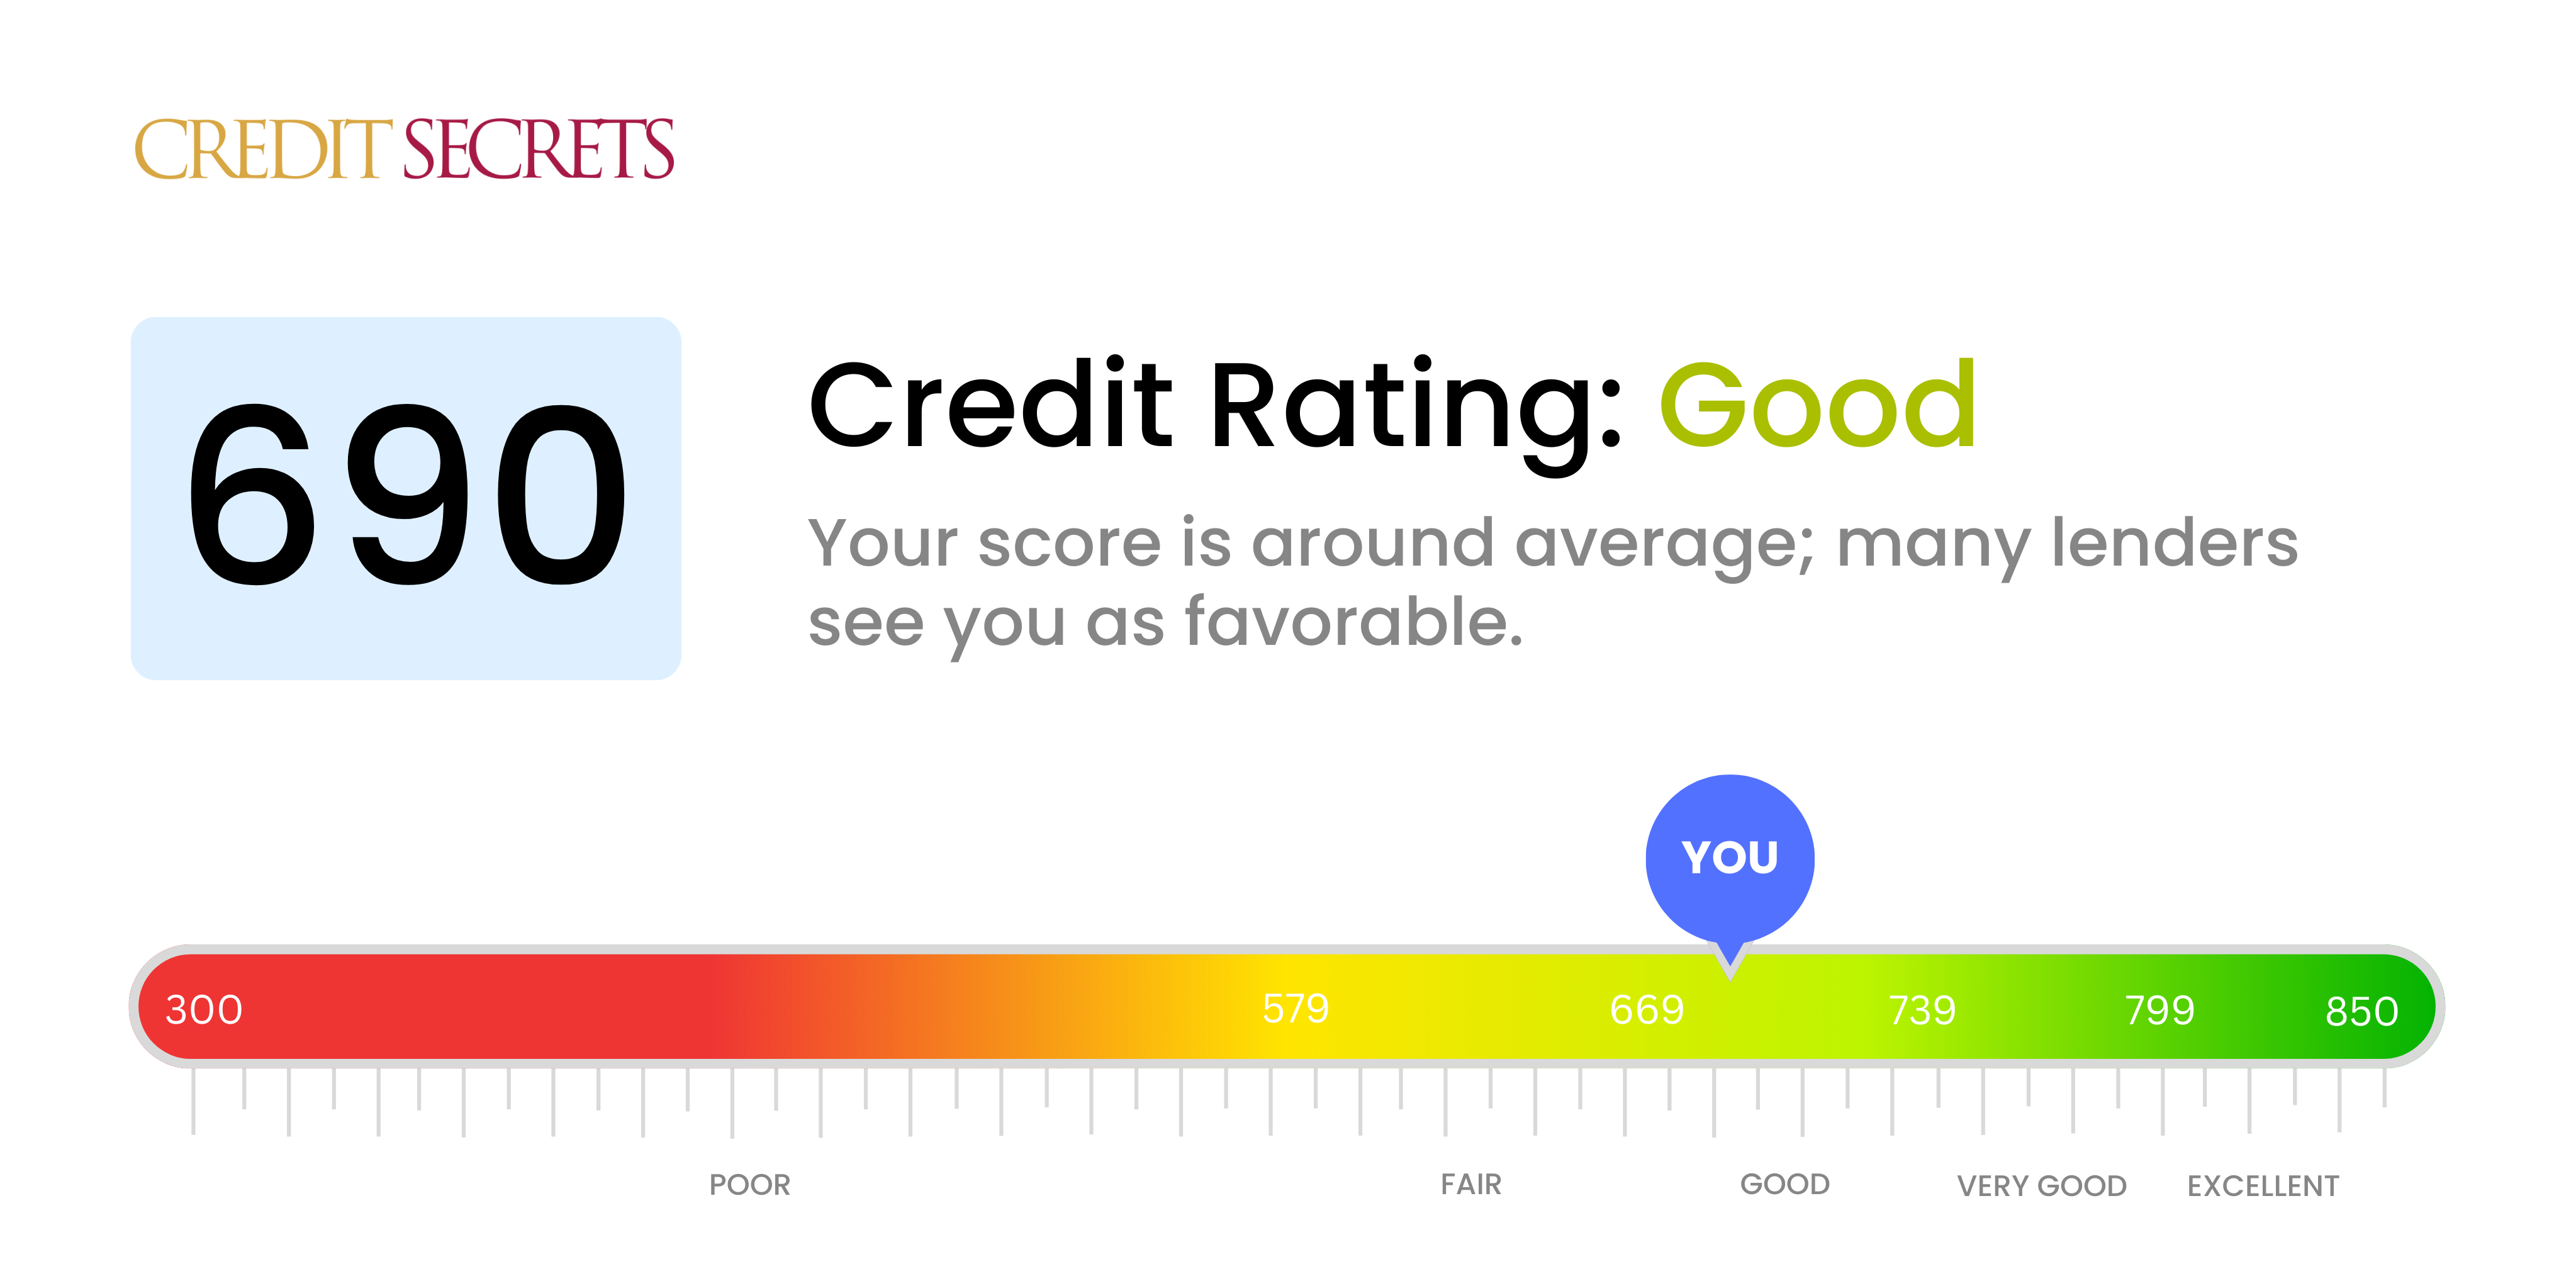 Is 690 a good credit score?